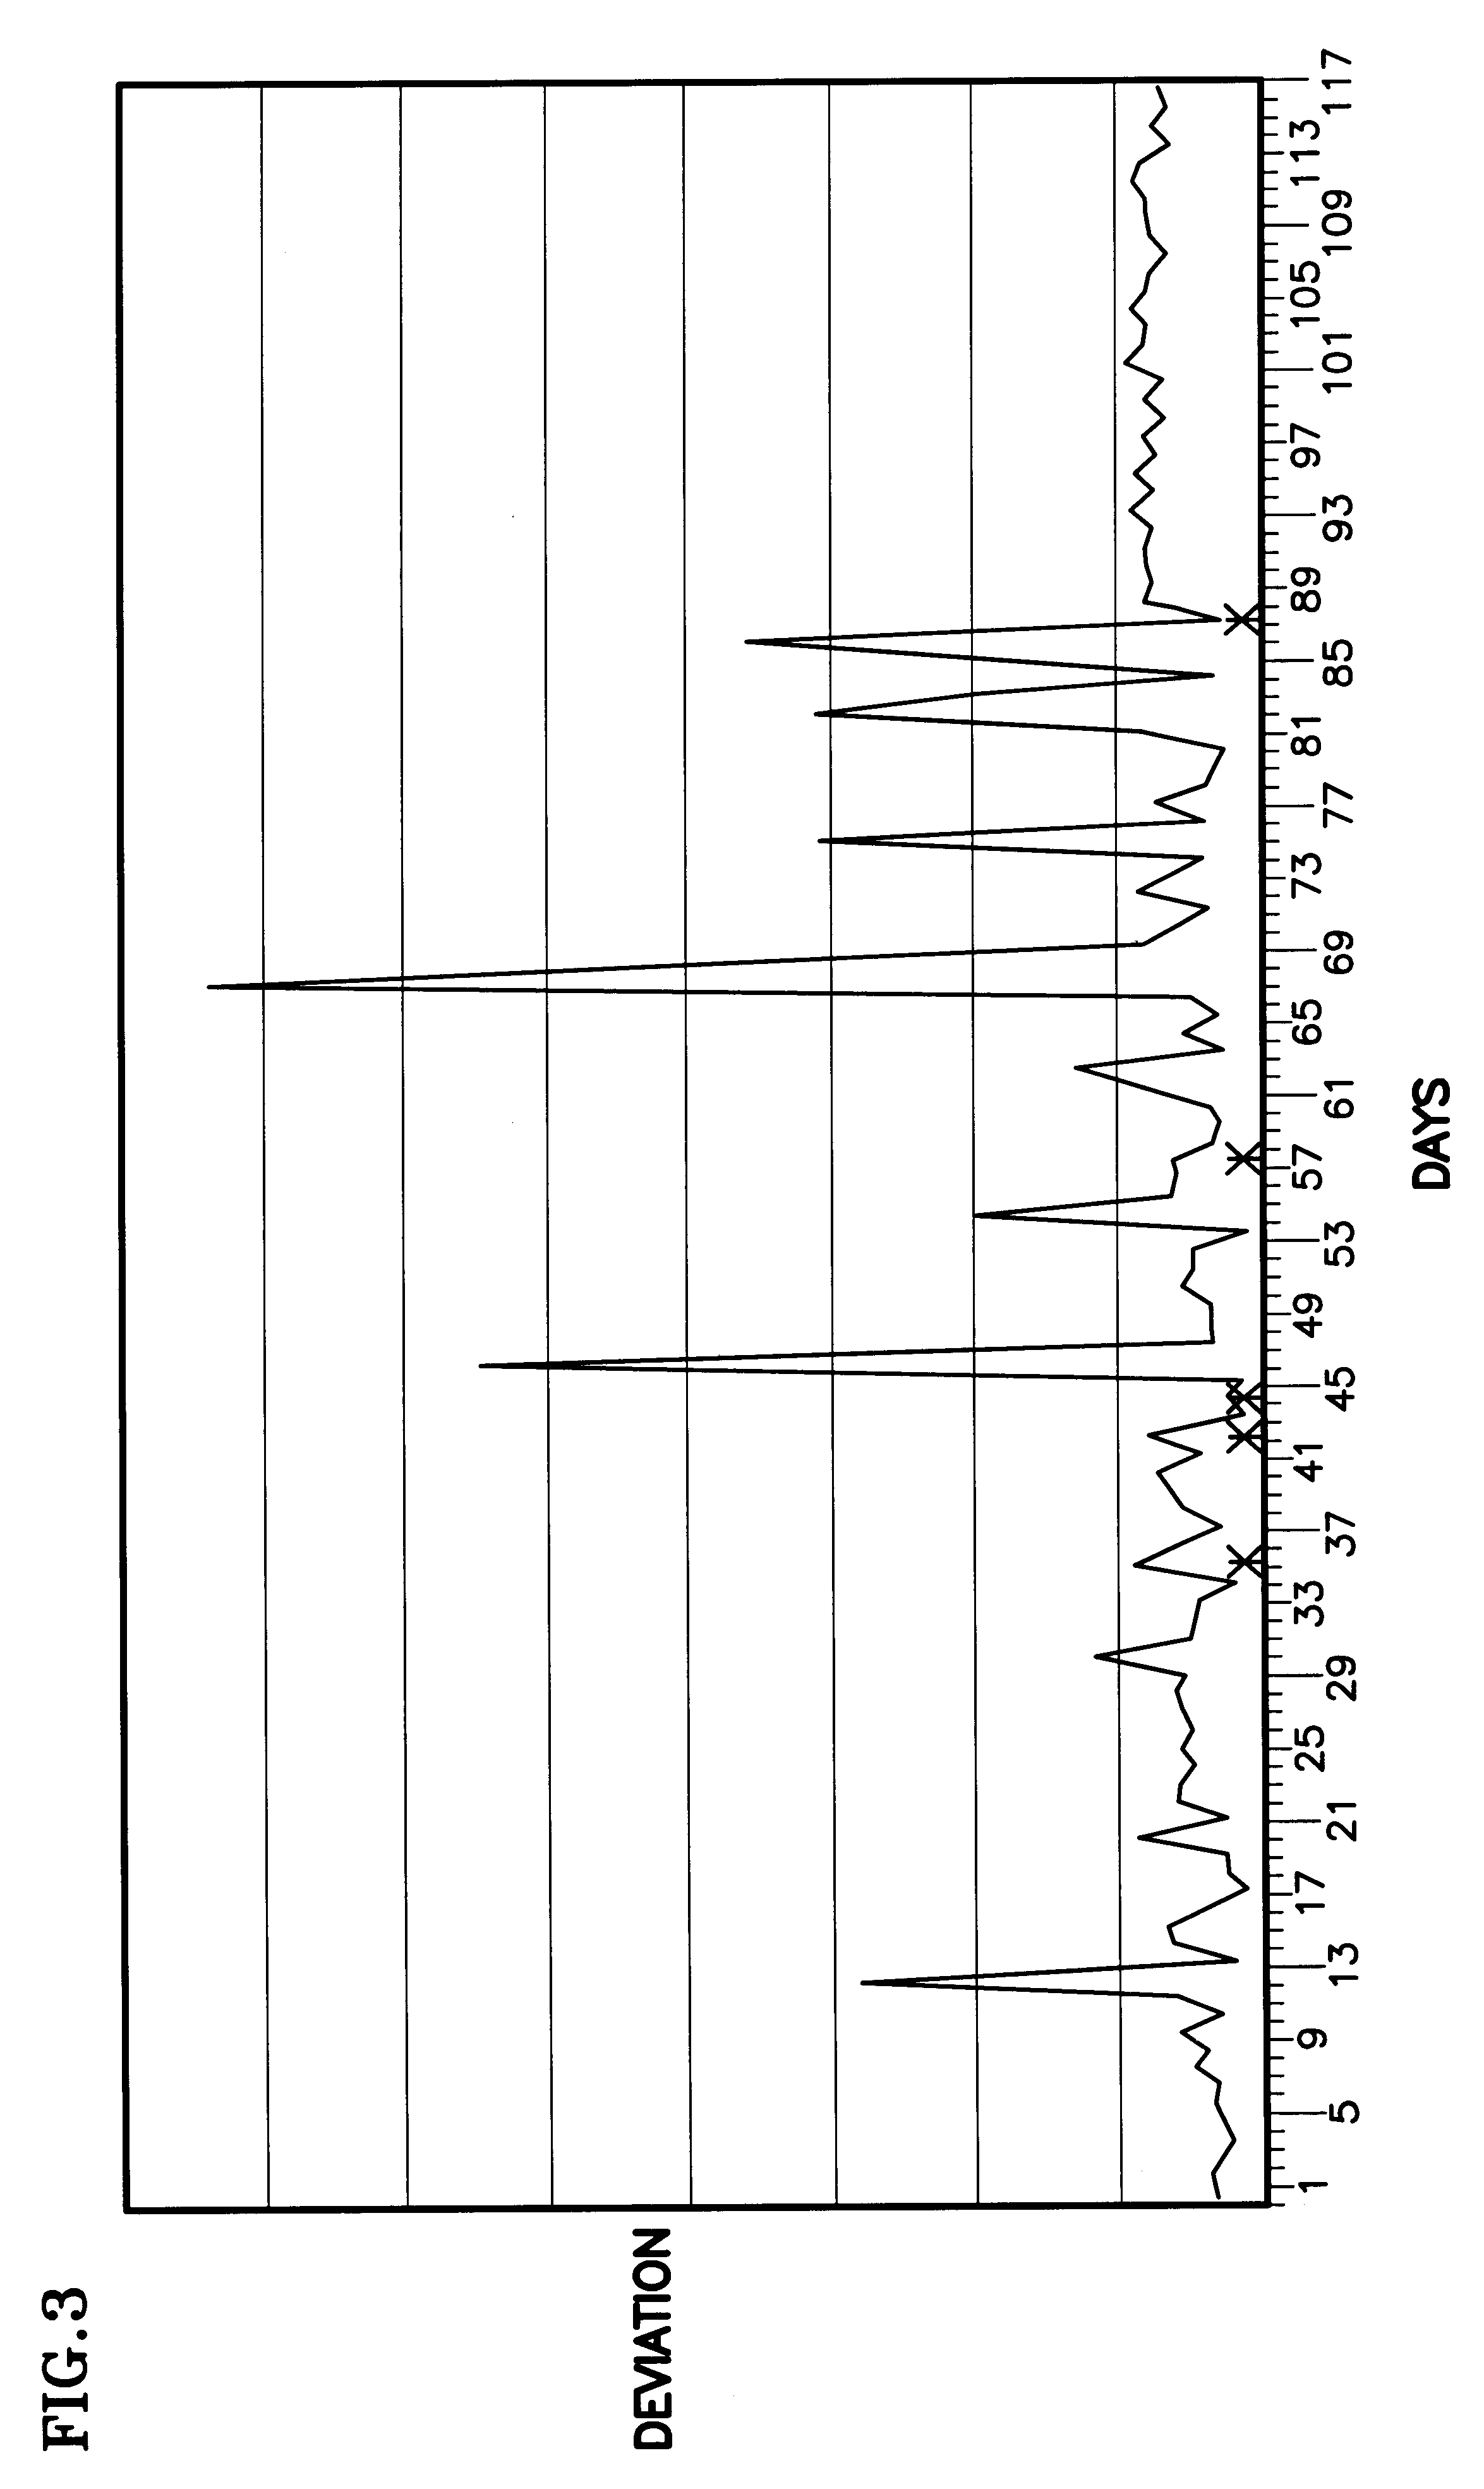 Monitoring system behavior using empirical distributions and cumulative distribution norms